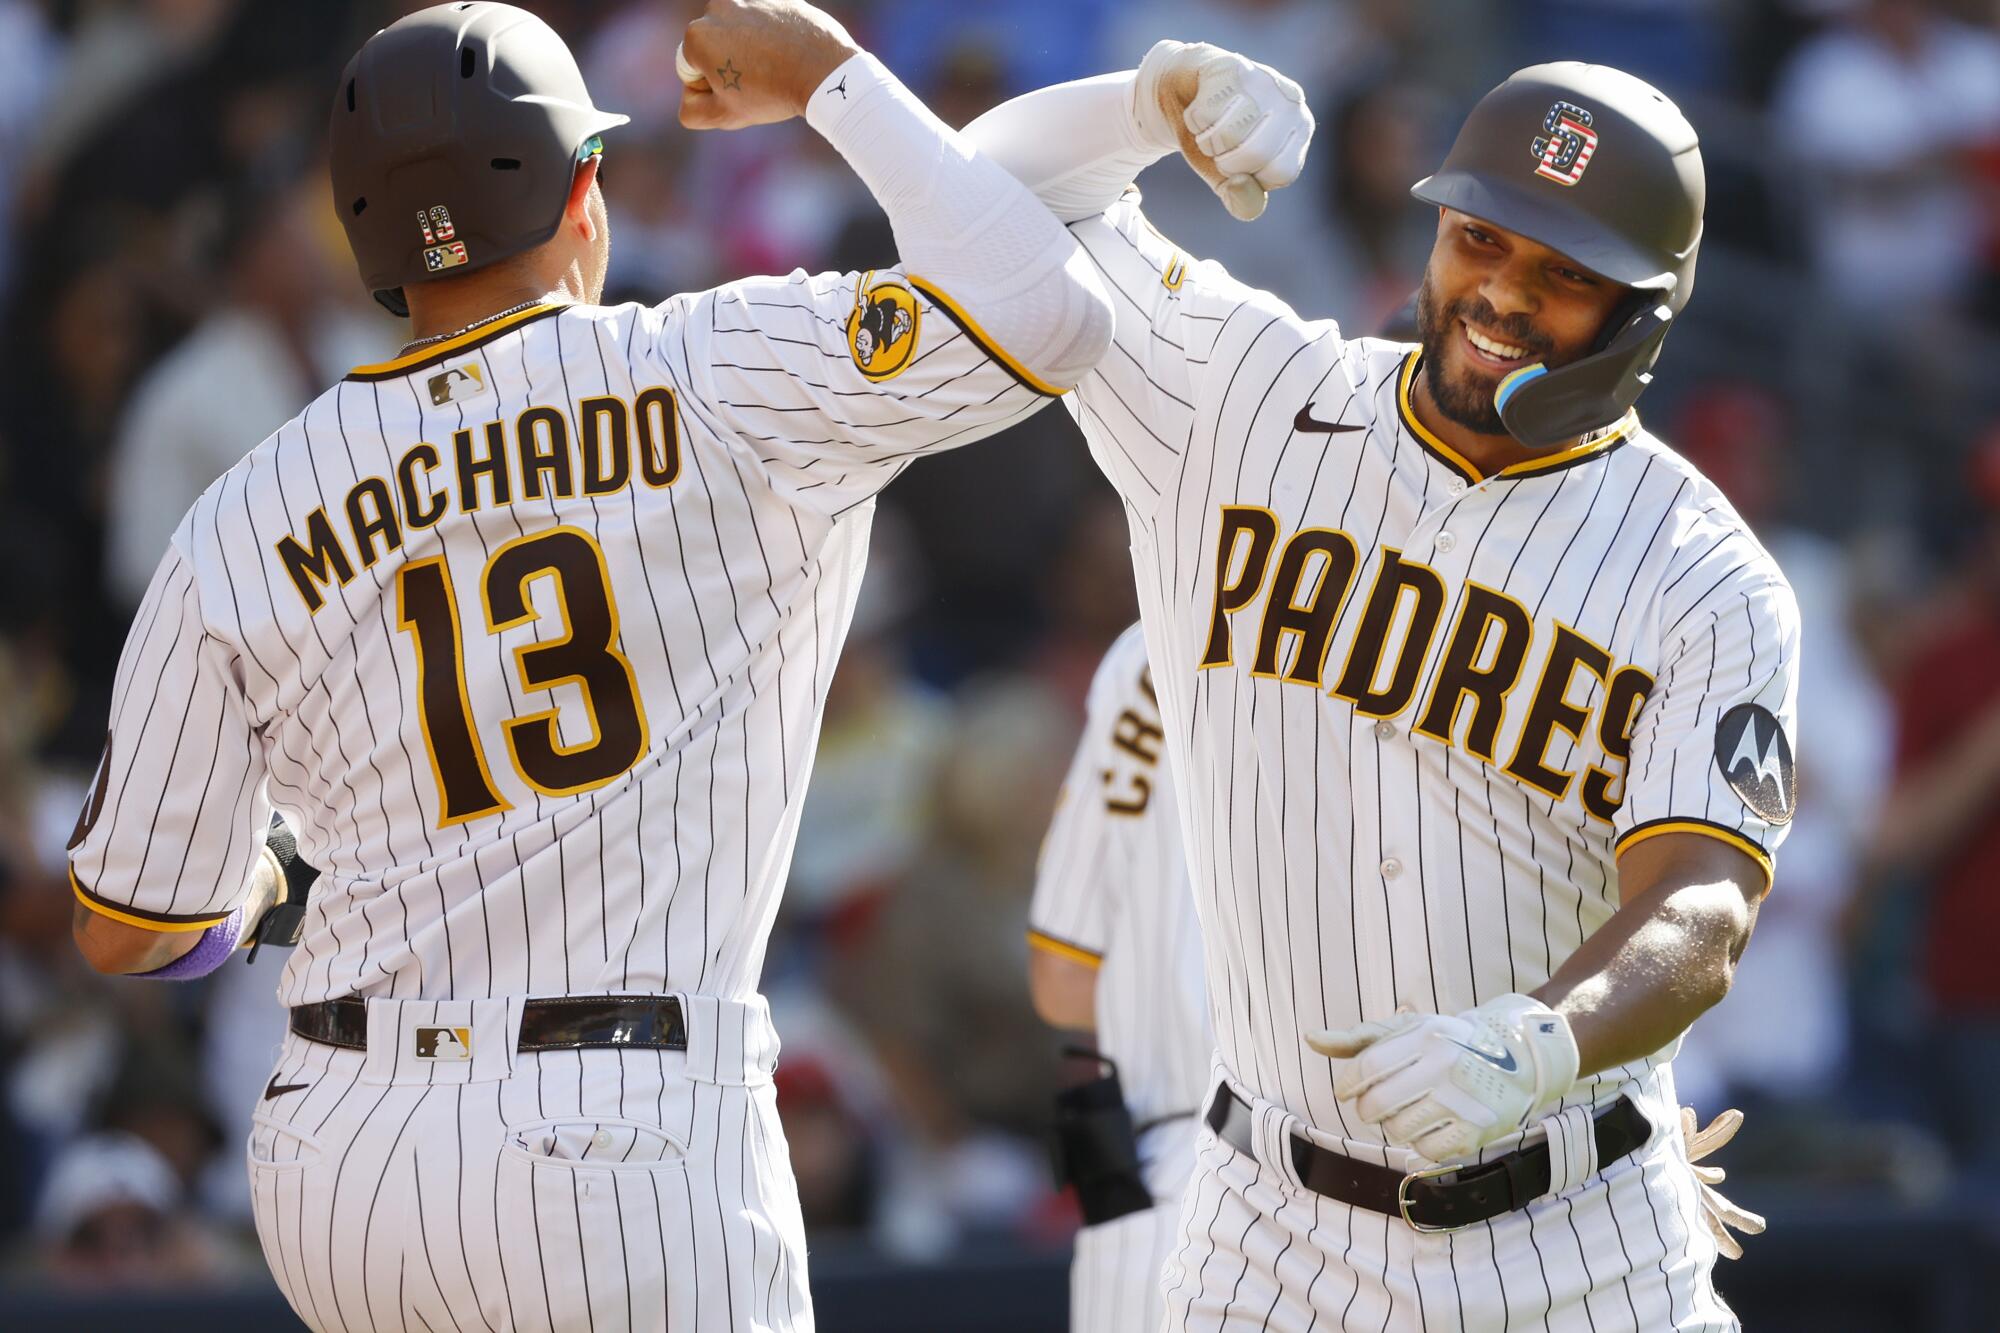 Padres current home uniform ranked 11th greatest of all time